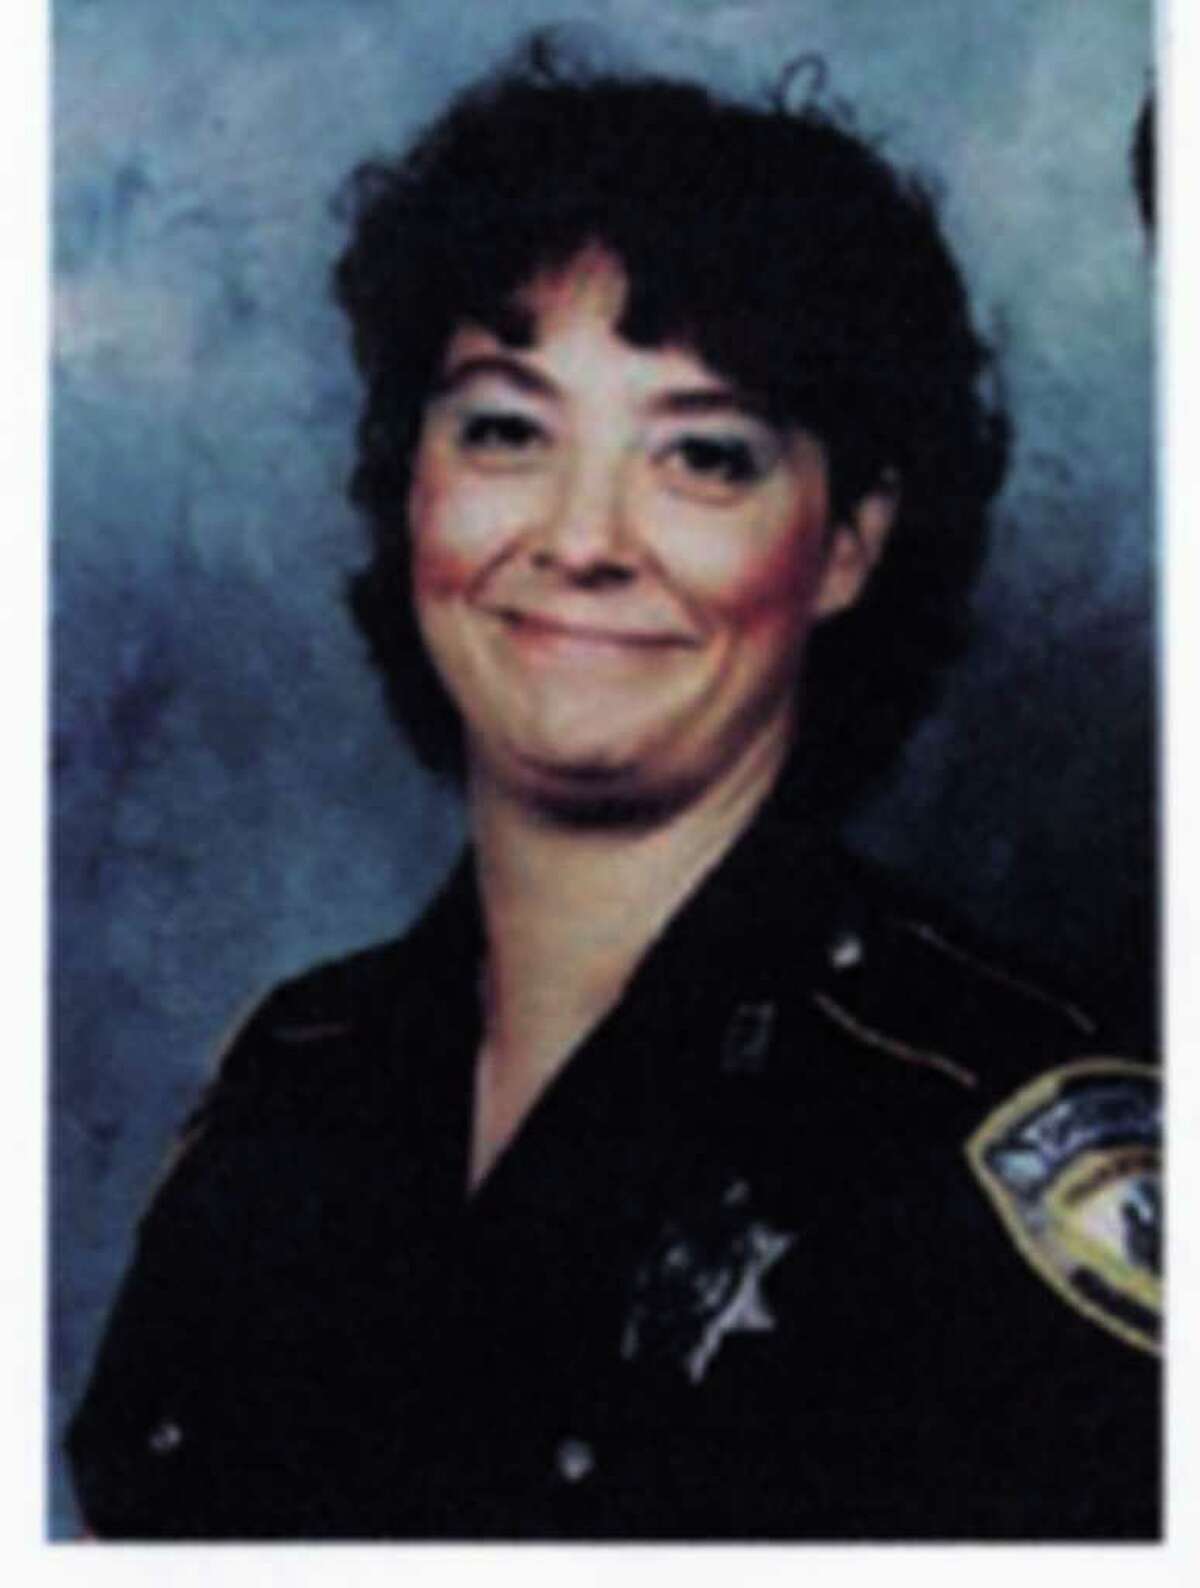 CONTACT FILED: ROXYANN ALLEE 2/13/02--copy shot of Harris County Deputy Roxyann Allee who was killed Sept. 30, 1991, after being abducted from the parking lot at Greenspoint Mall. HOUCHRON CAPTION (02/14/2002 - 2-star): Allee.